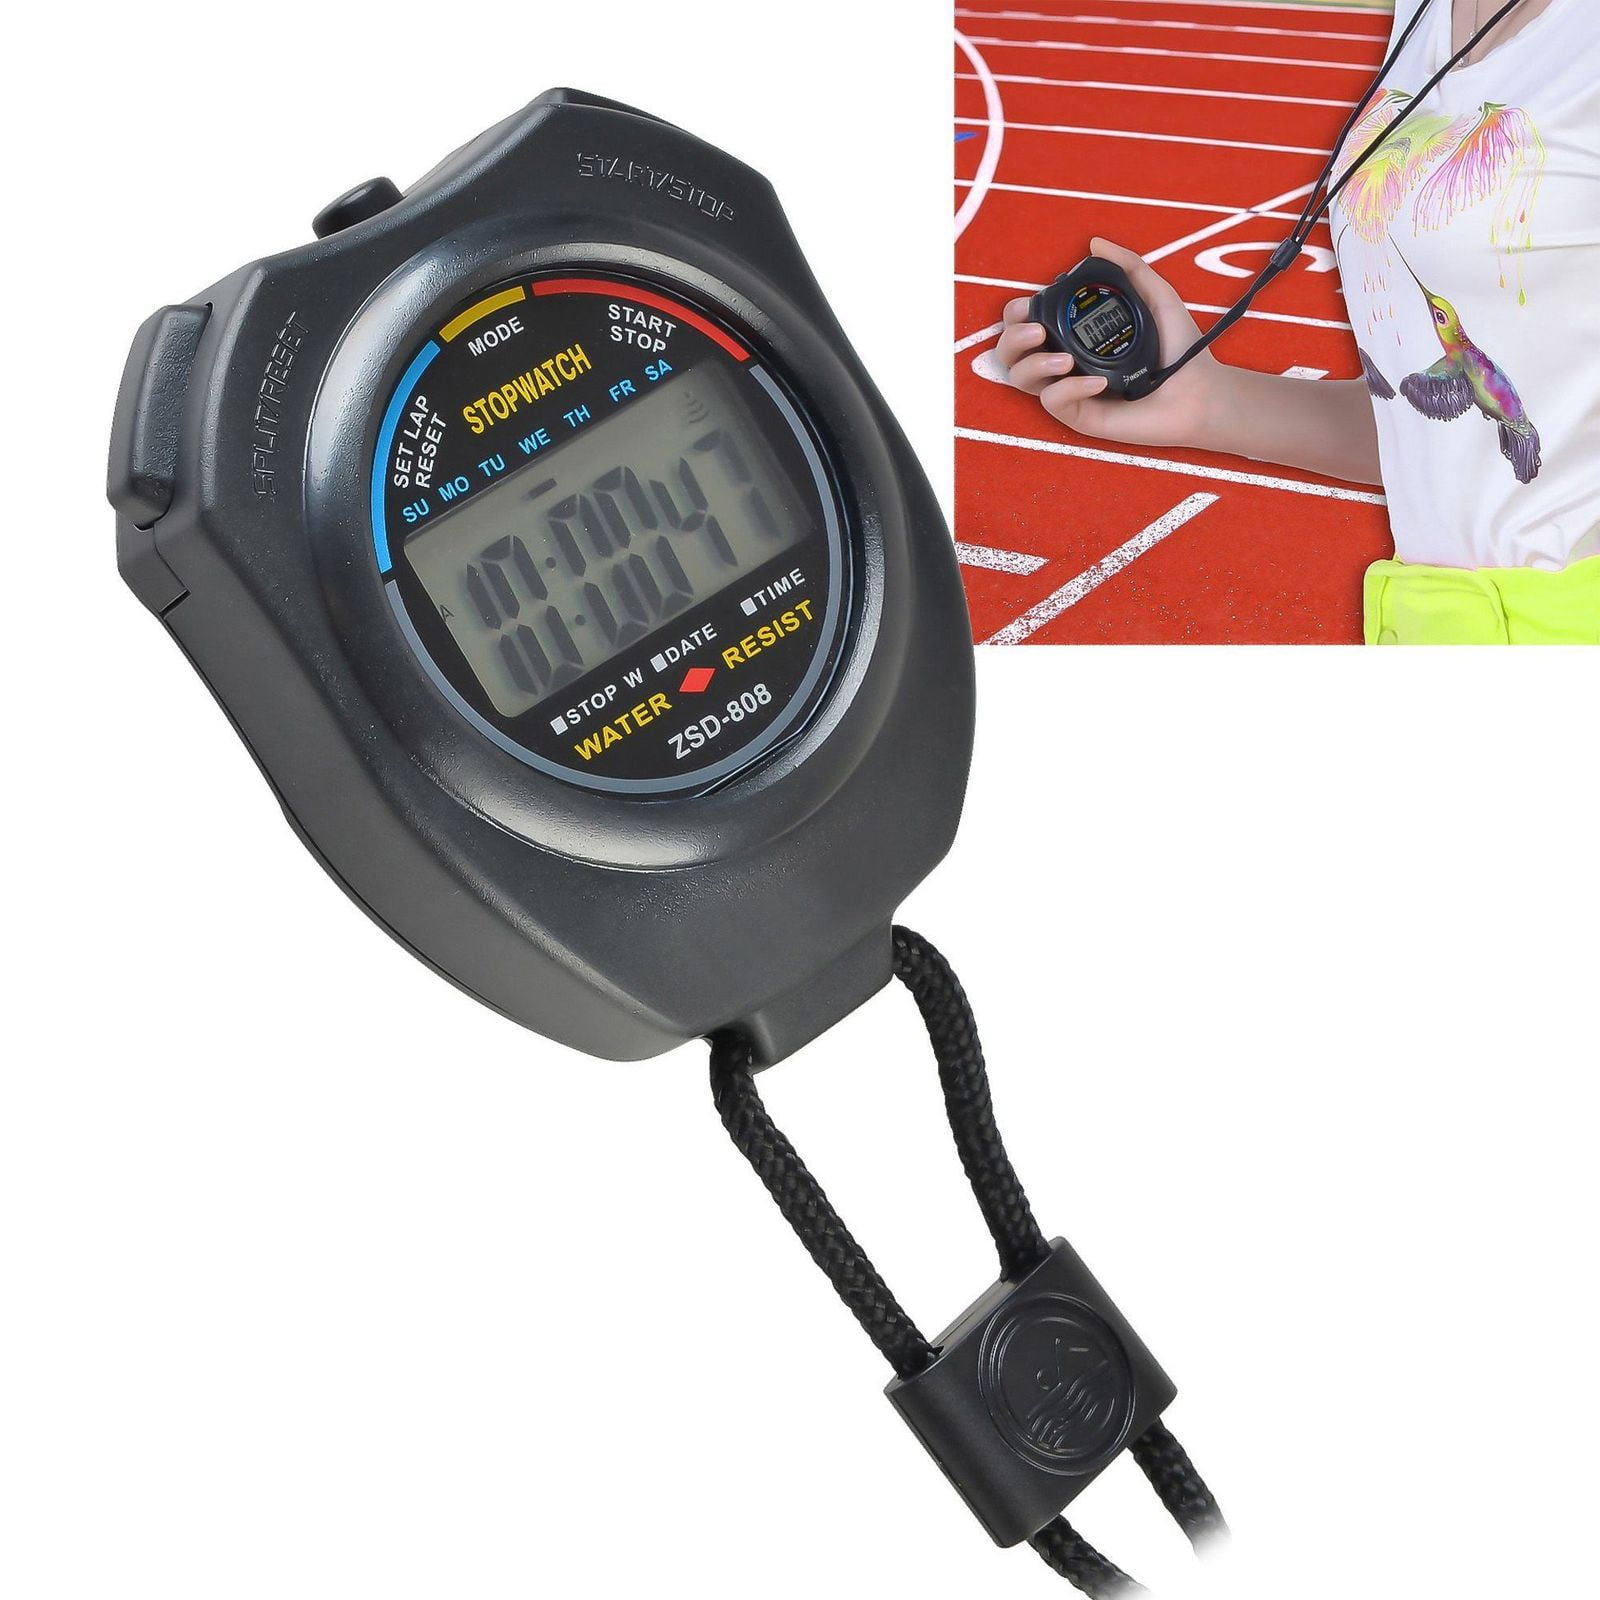 Electronic LCD Timer Digital Sport Stopwatch Date Time Alarm Counter Chronograph 